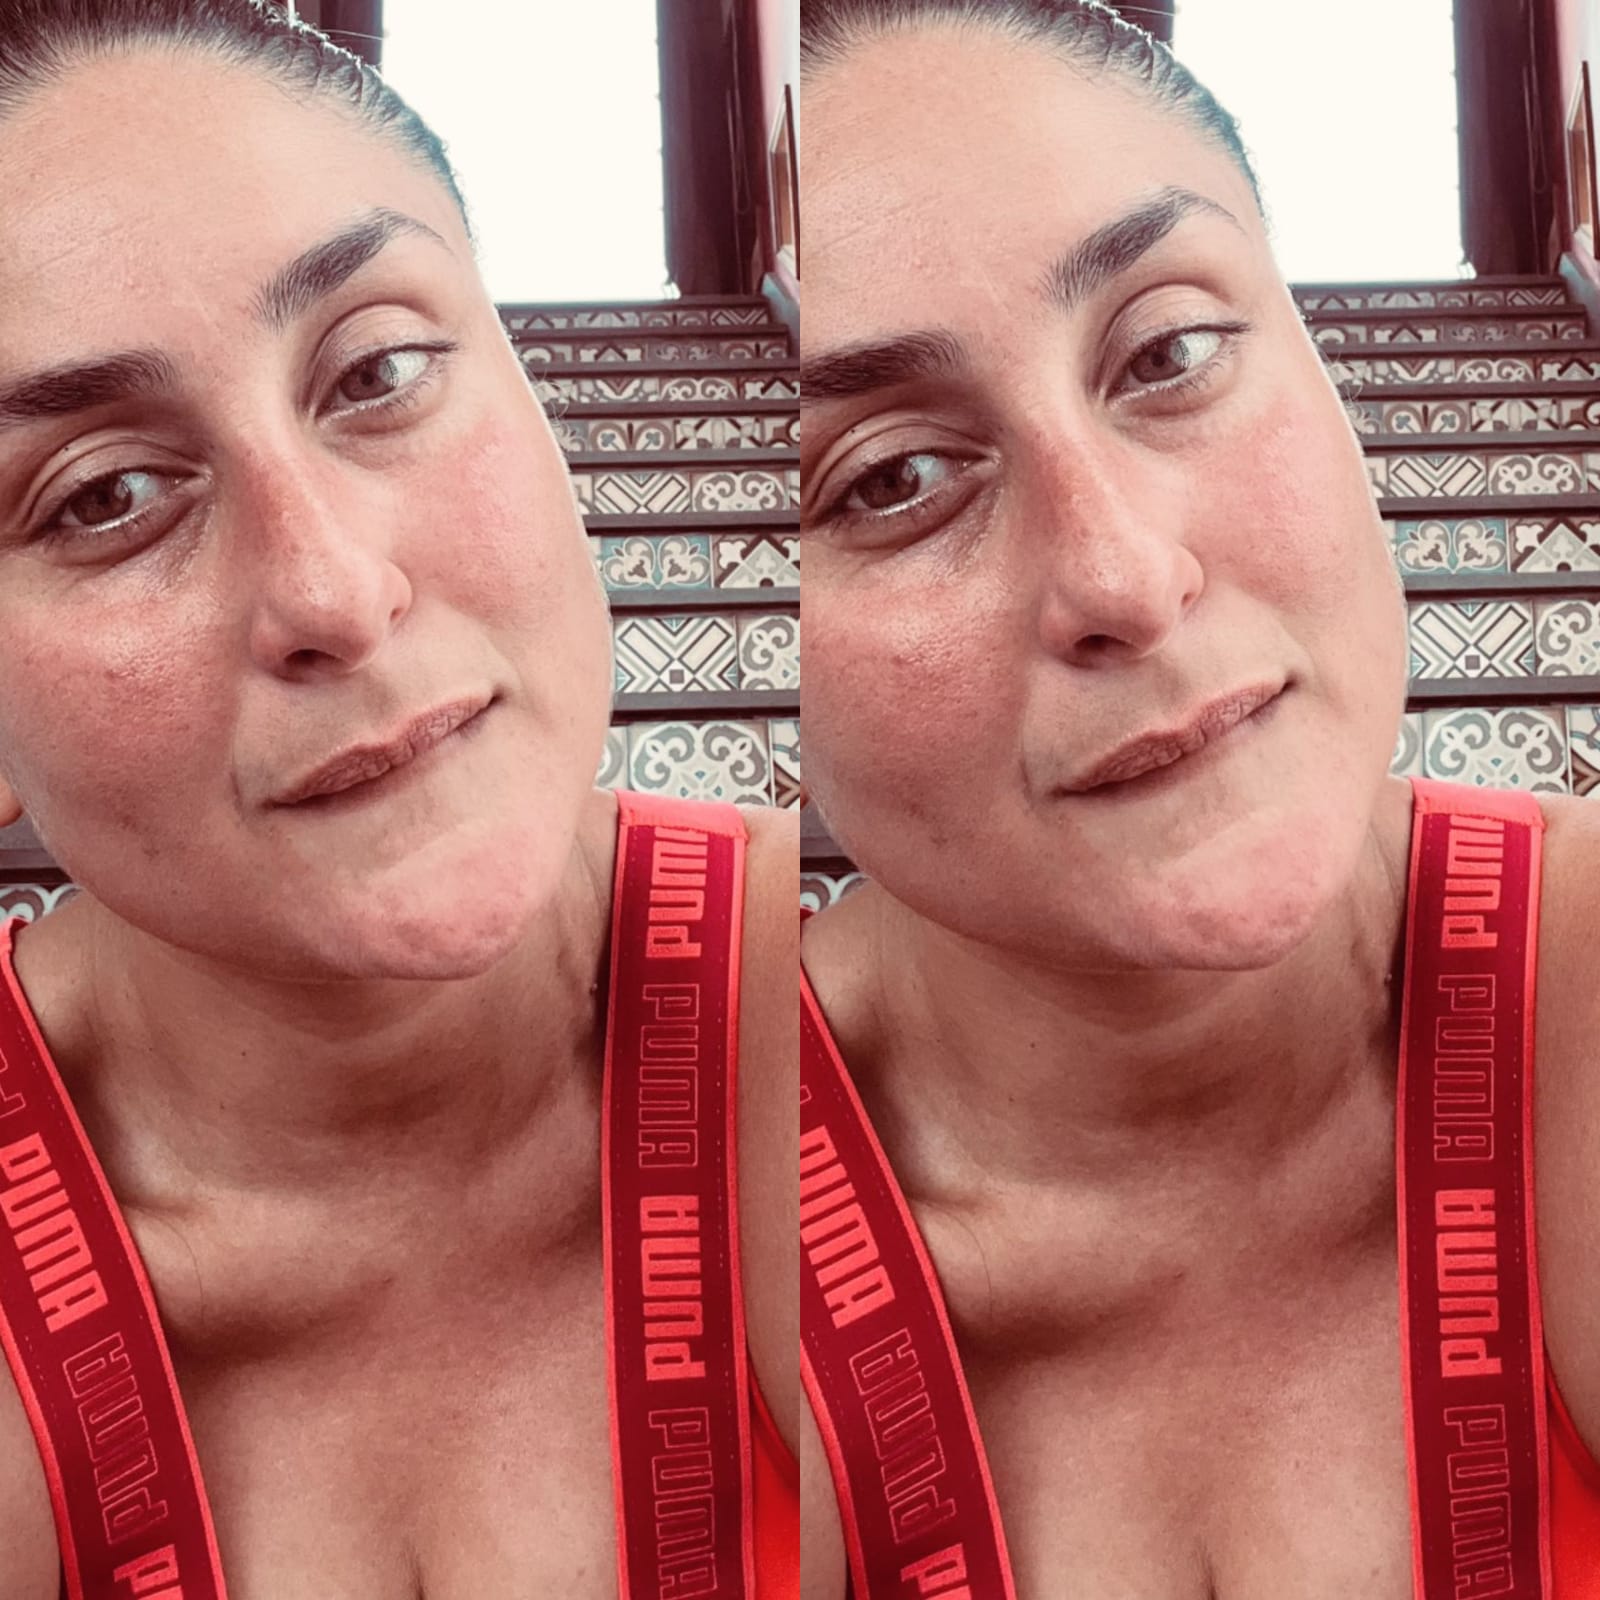 Kareena Xxx Video - Kareena Kapoor Khan Looks Exquisite In Latest Pic As She Shows The  'Stairway To Her Heart'